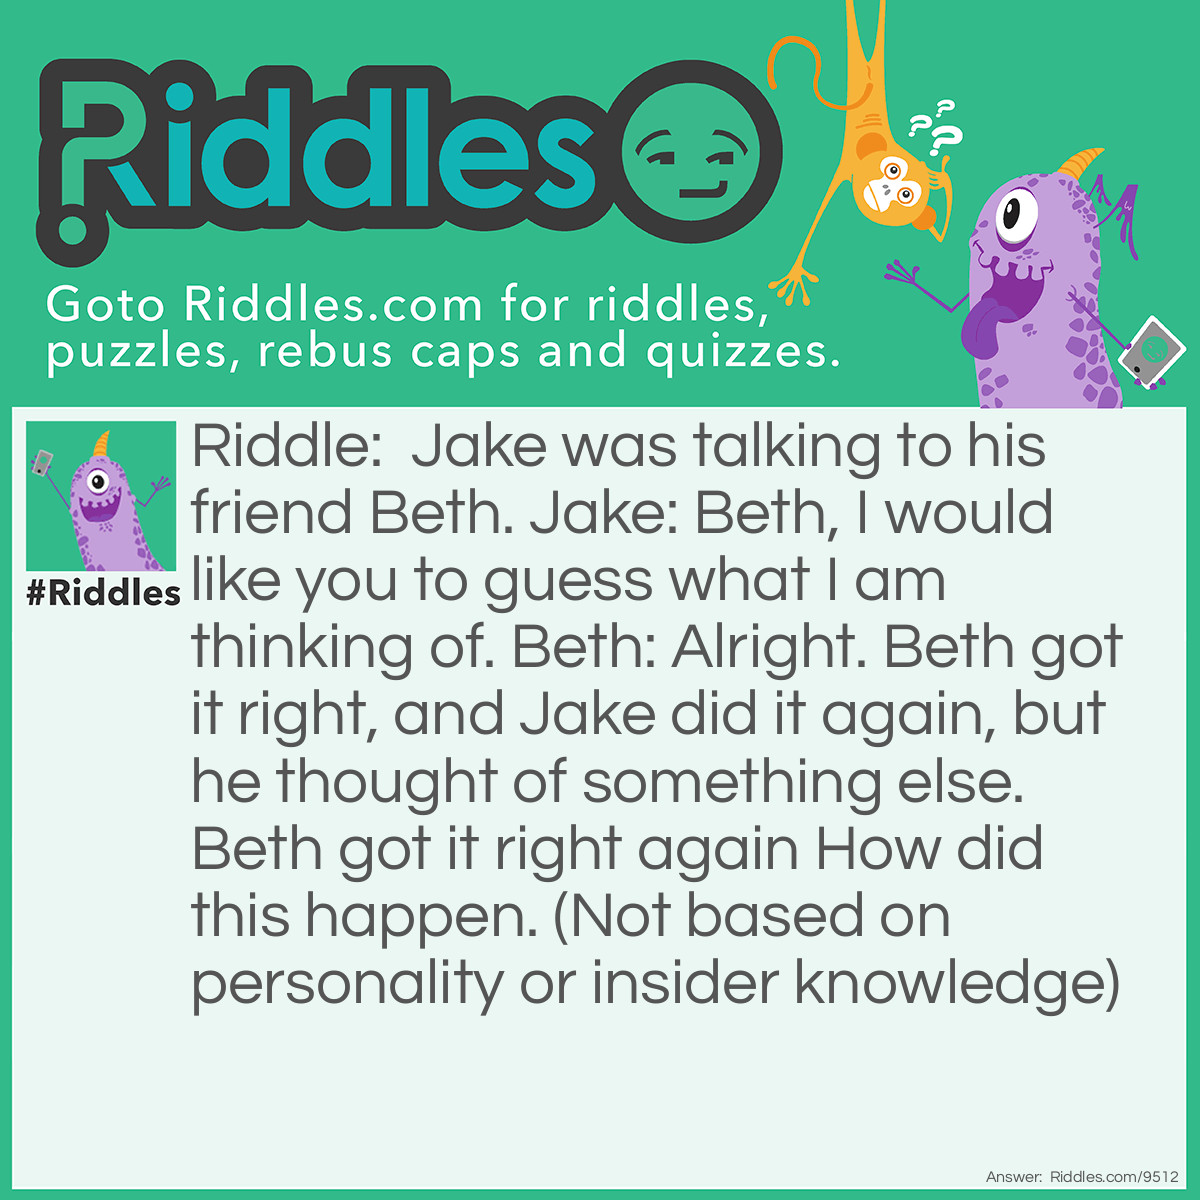 Riddle: Jake was talking to his friend Beth. Jake: Beth, I would like you to guess what I am thinking of. Beth: Alright. Beth got it right, and Jake did it again, but he thought of something else. Beth got it right again How did this happen. (Not based on personality or insider knowledge) Answer: Jake is a schizophrenic who hallucinated beth, having her guess right every time.